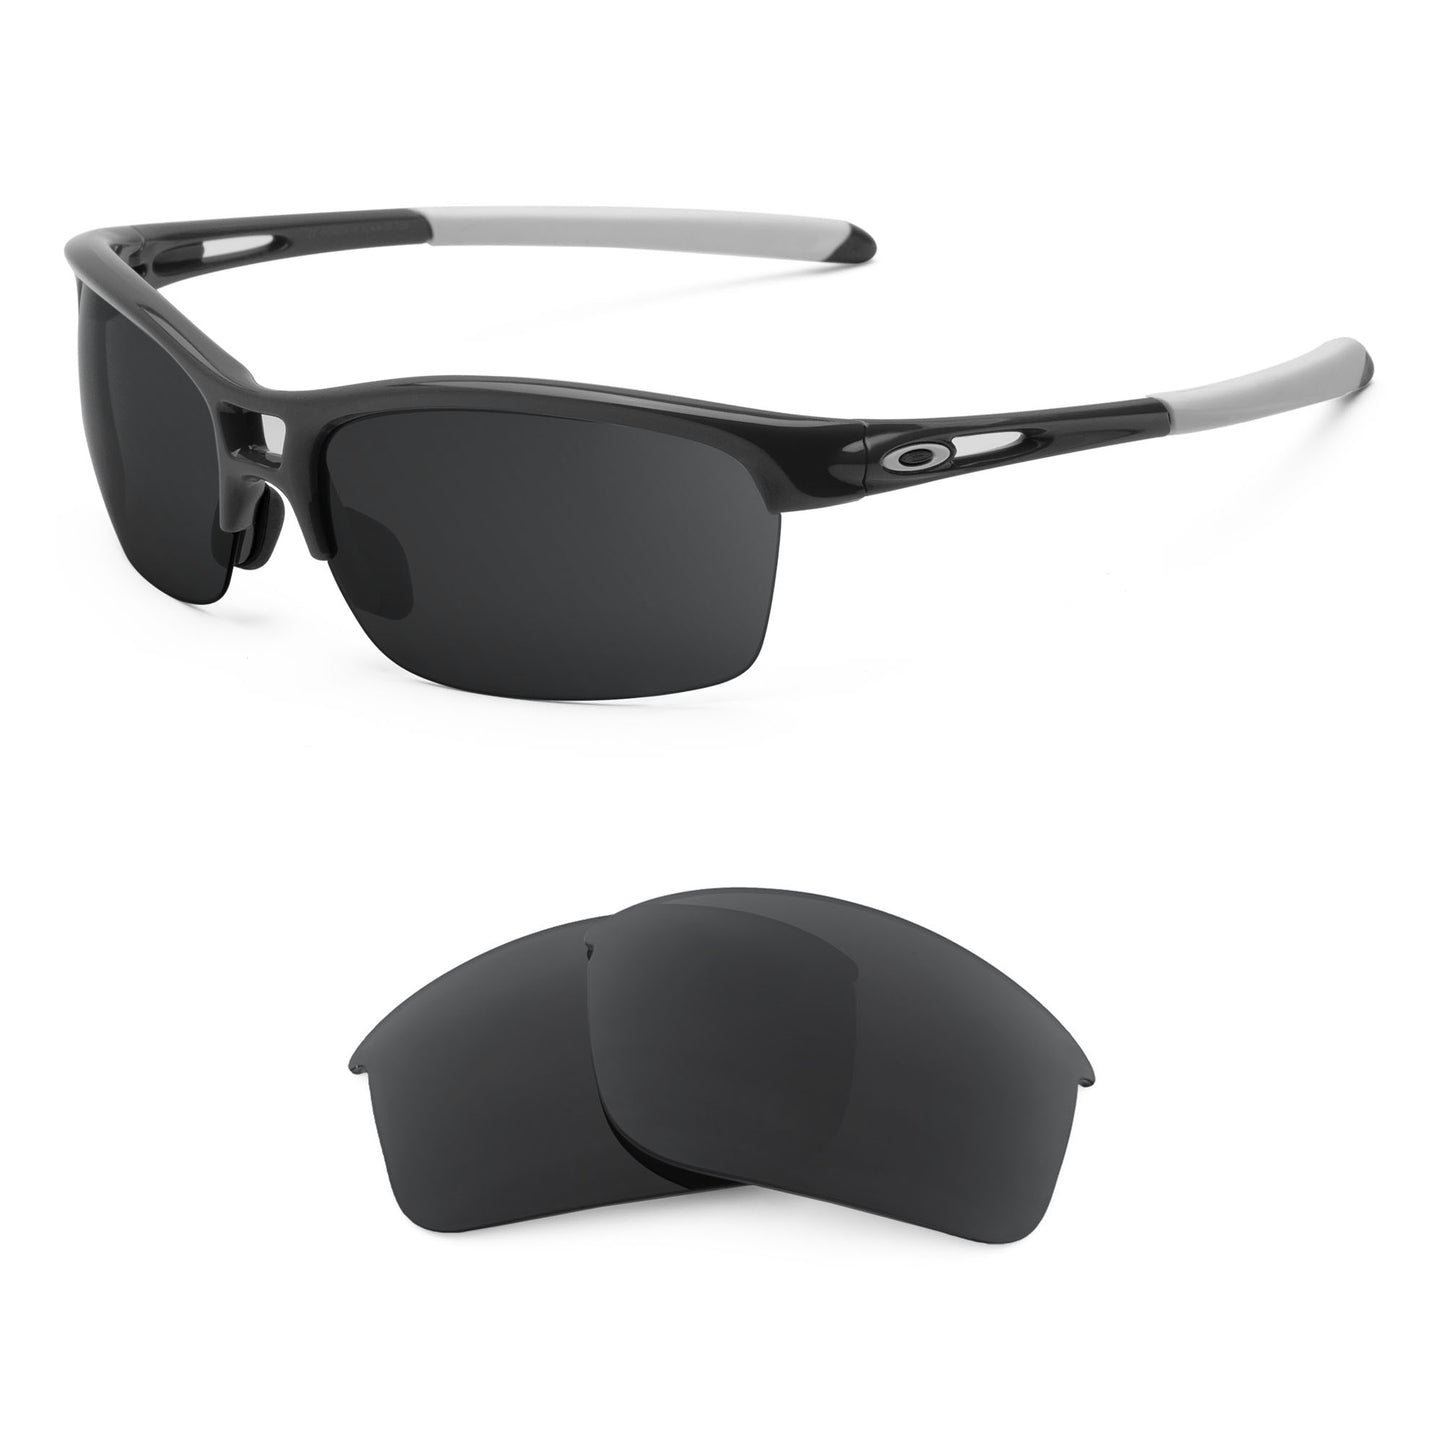 Oakley RPM Squared sunglasses with replacement lenses